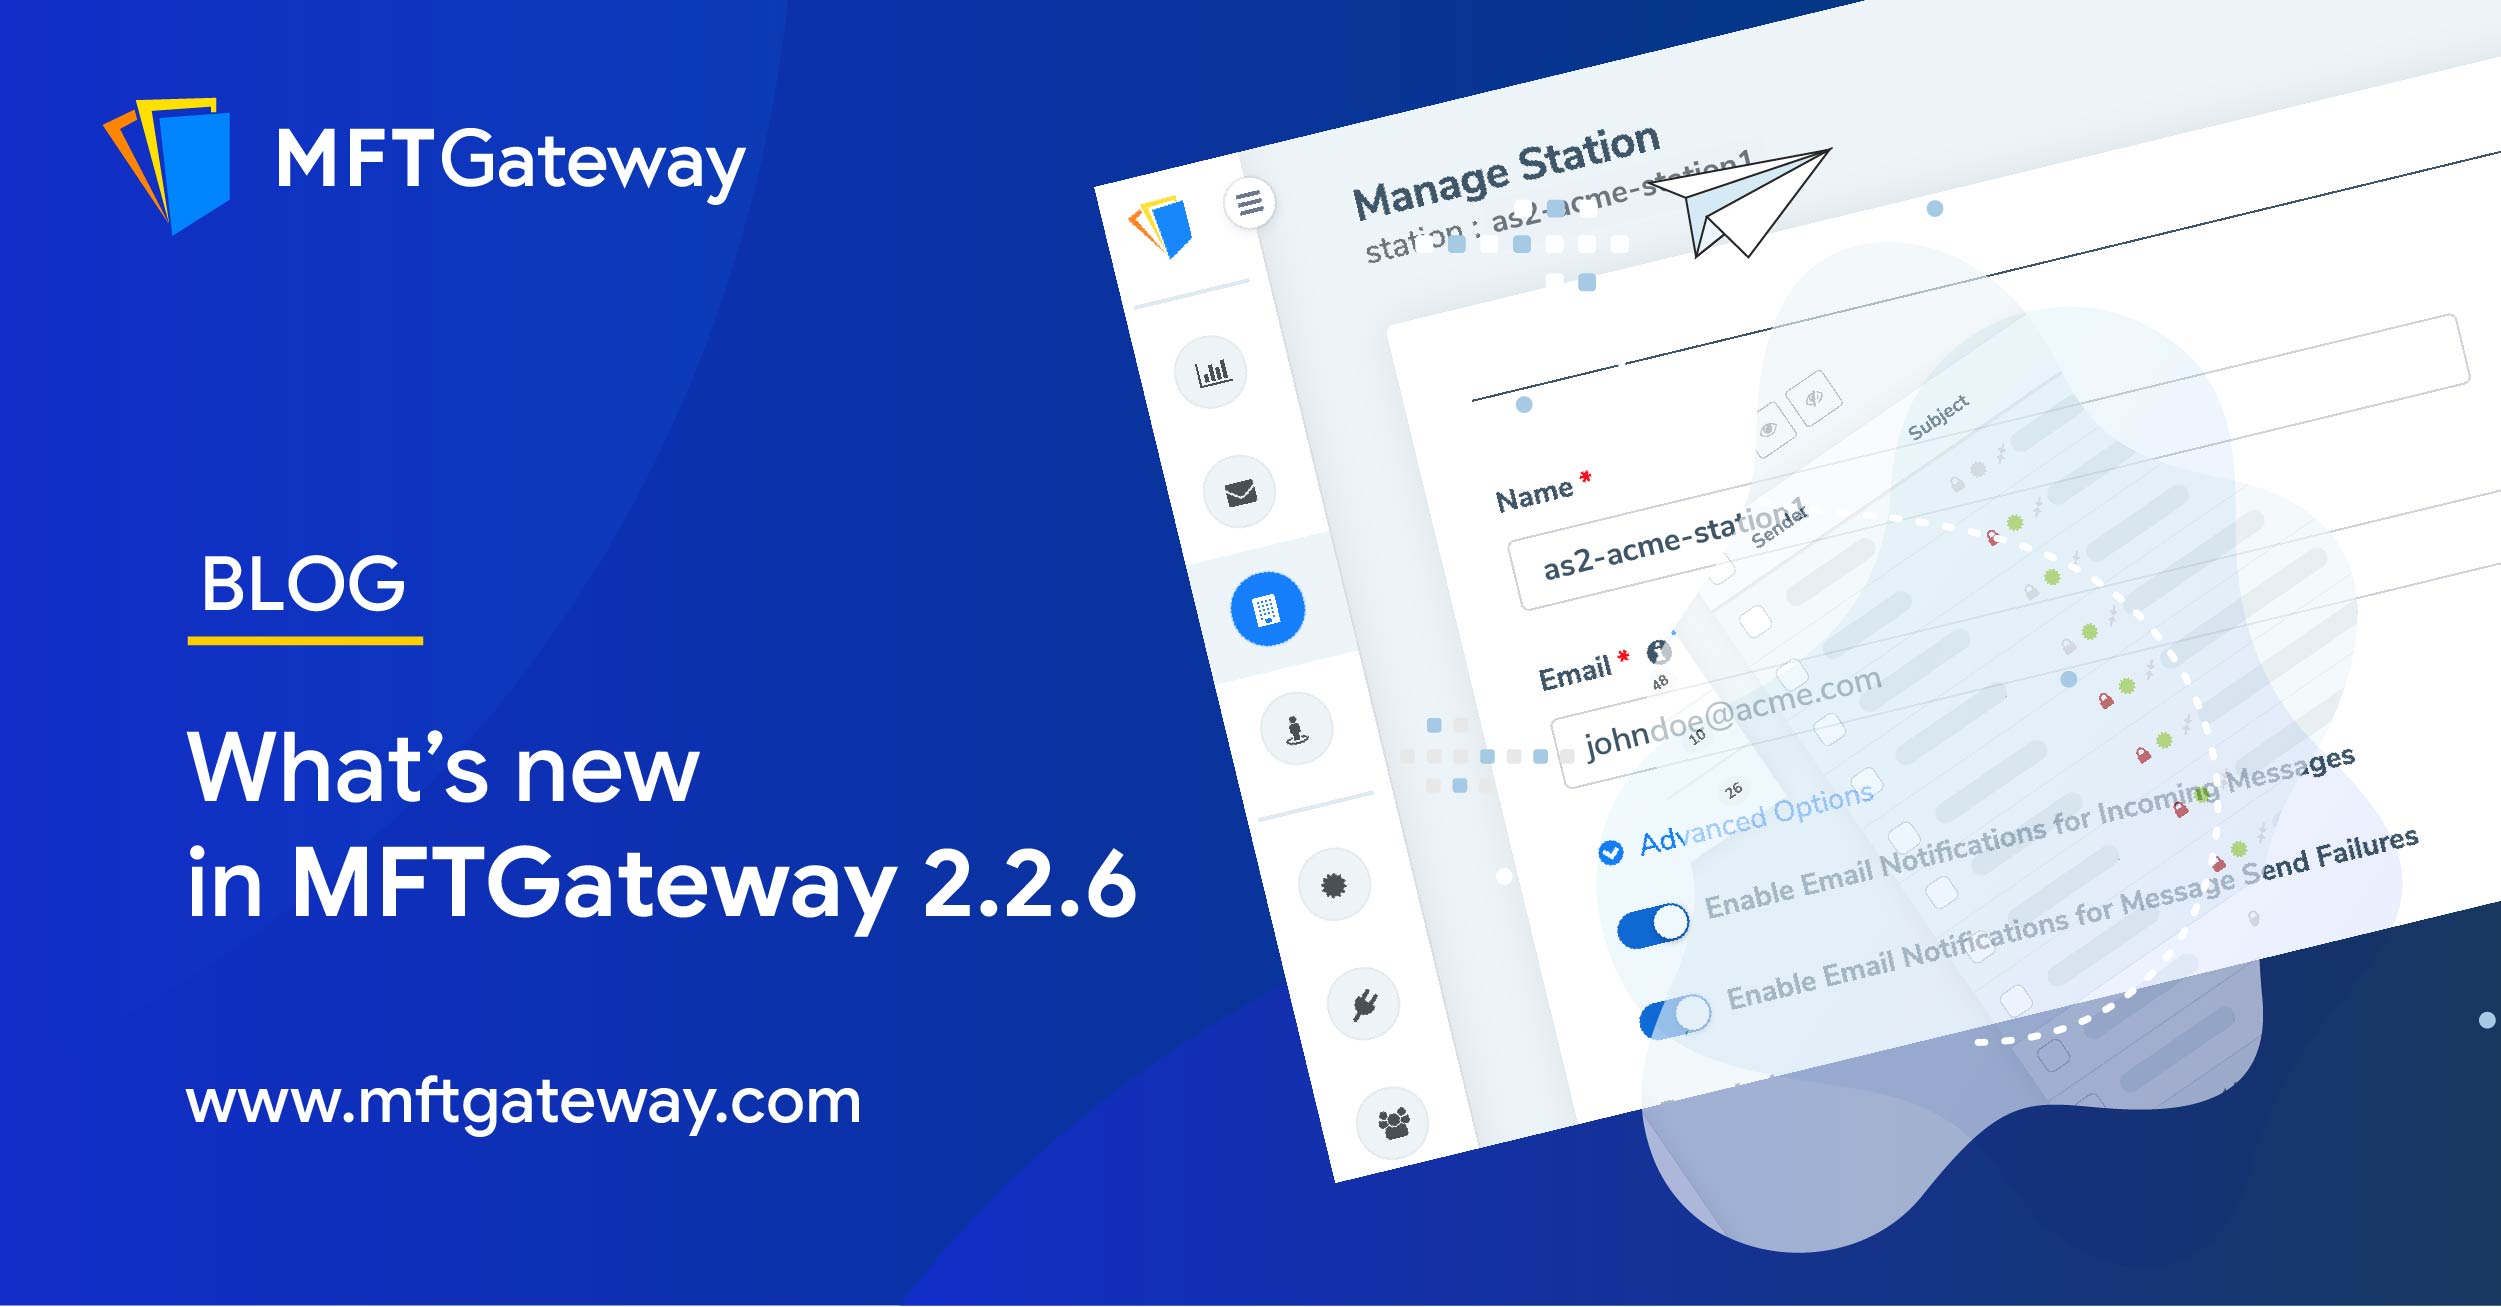 MFT Gateway 2.2.6 | API Endpoints,SSL Support & Email Notifications